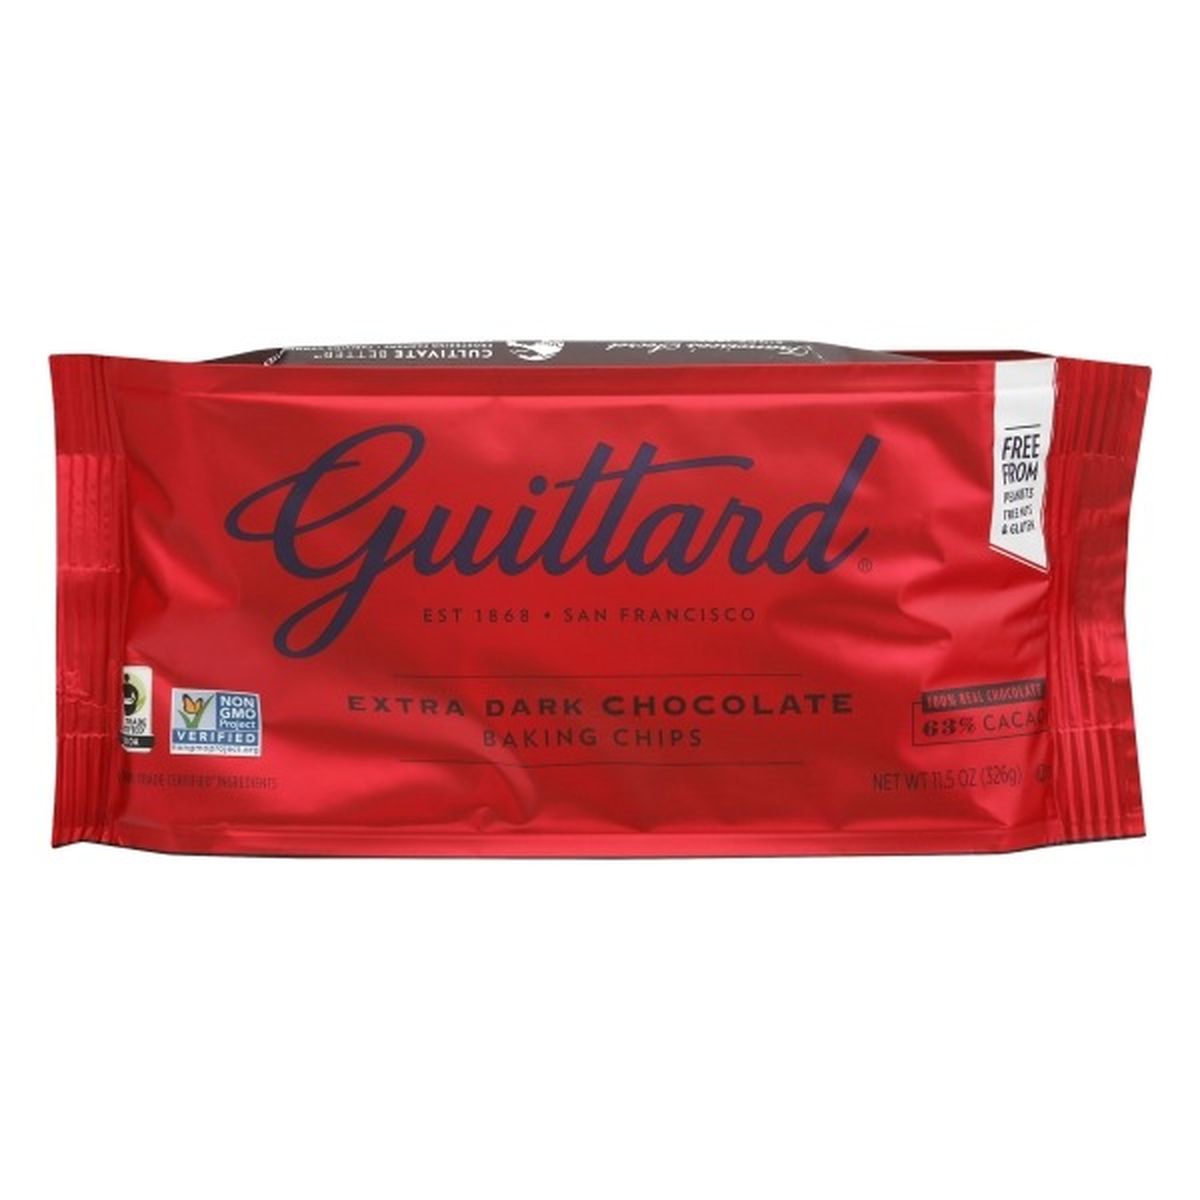 Calories in Guittard Baking Chips, Extra Dark Chocolate, 63% Cacao